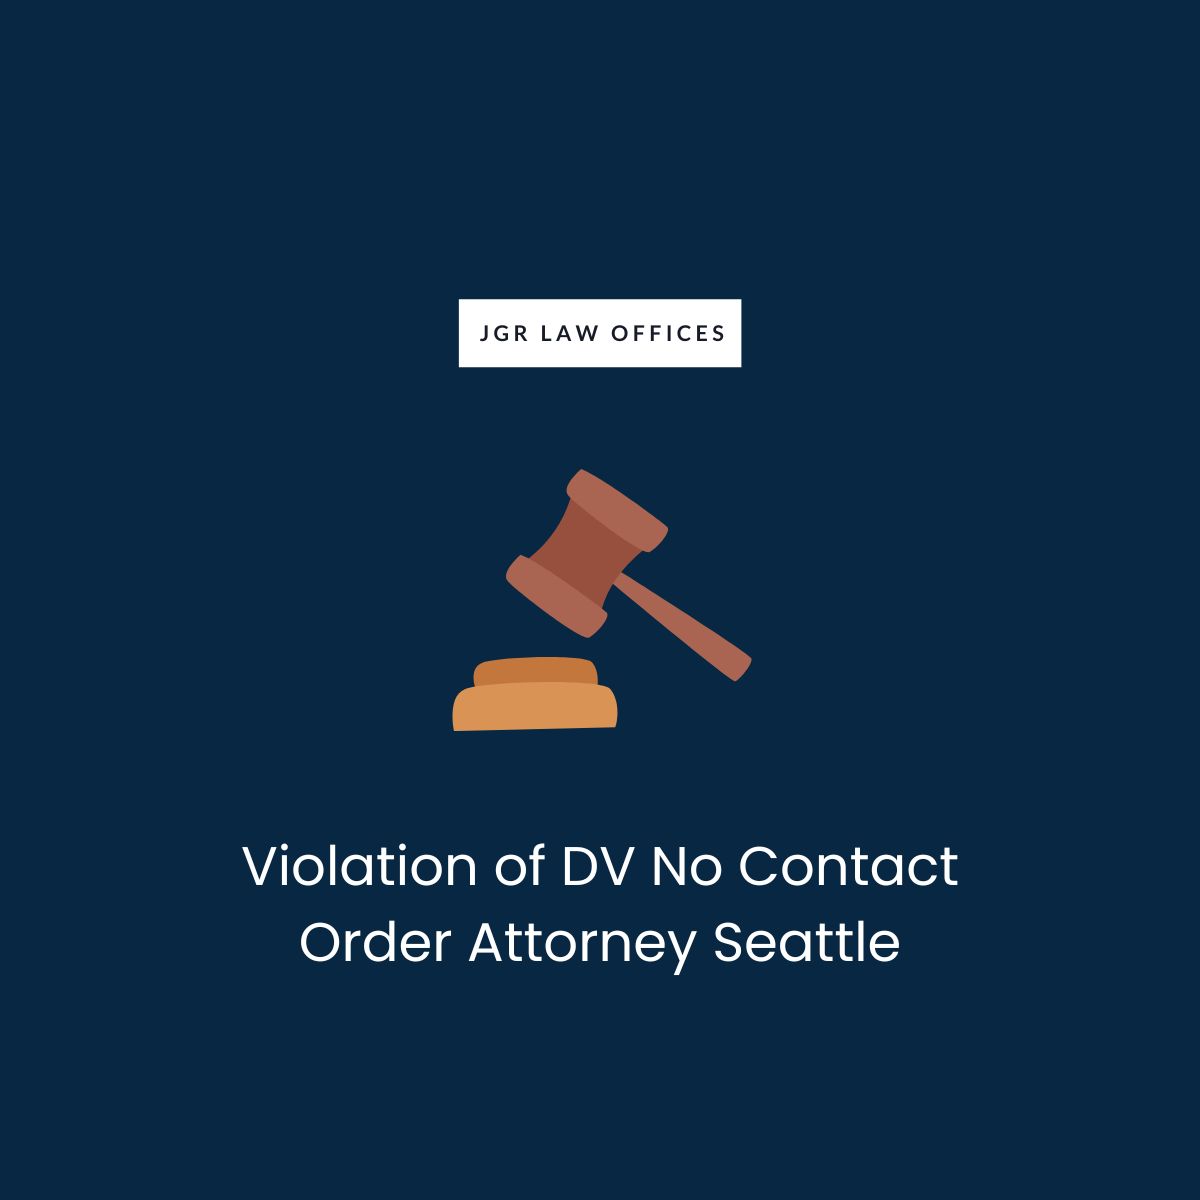 Violation of DV No Contact Order Lawyer Seattle